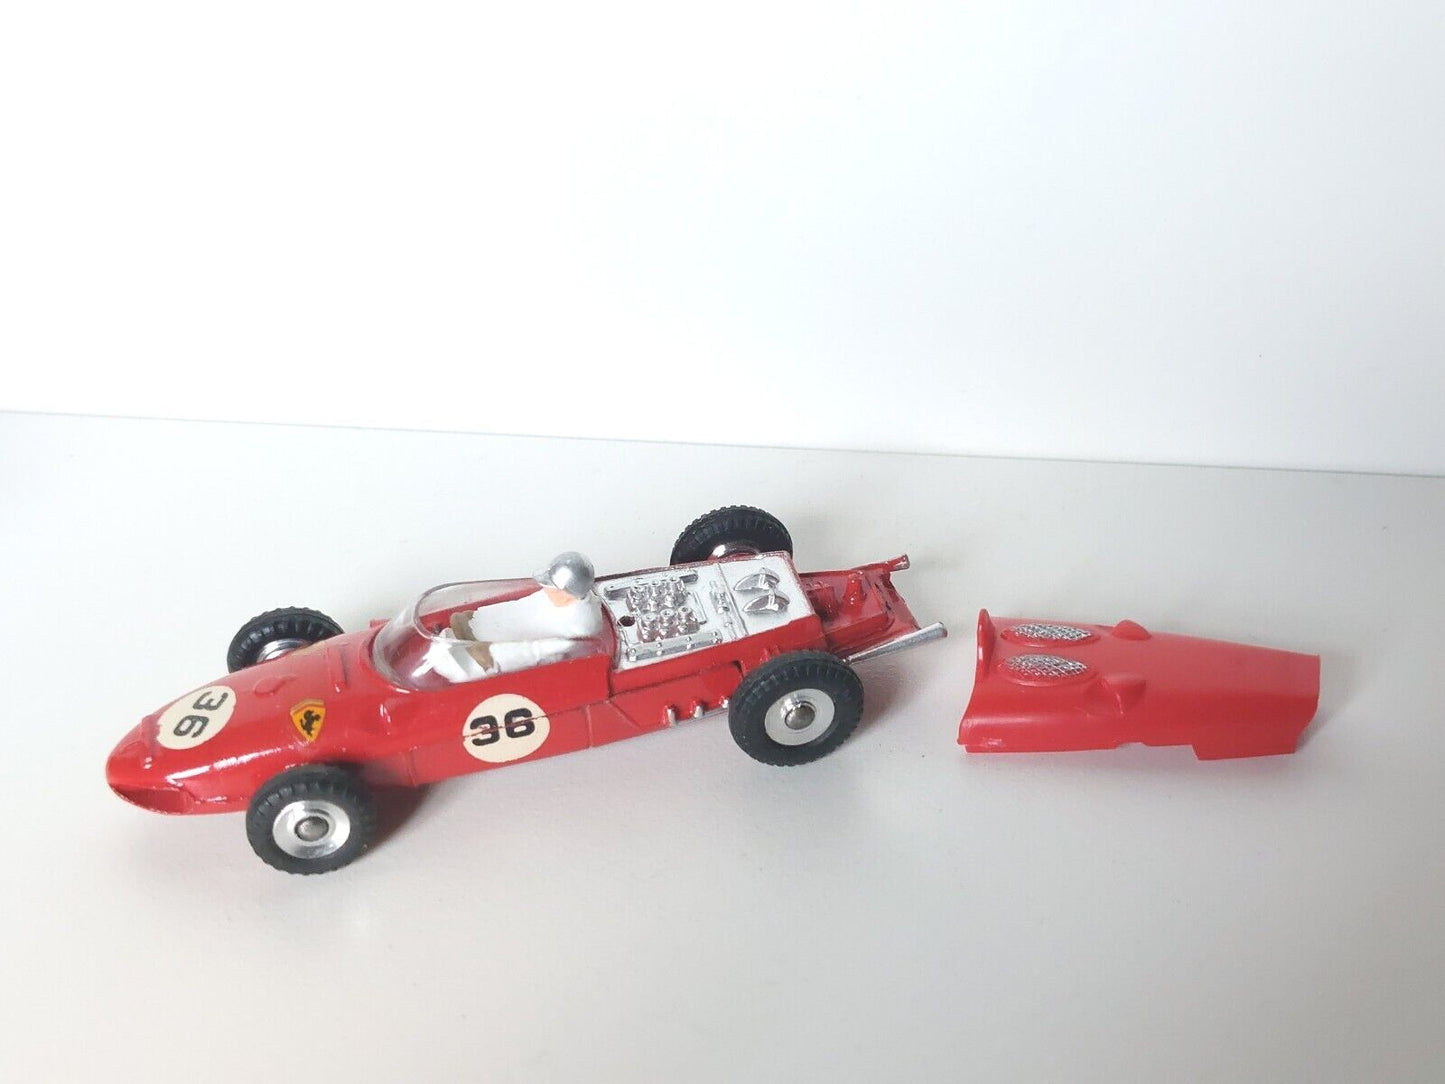 DINKY BOXES 242 Ferrari repro 'age-related' box - Each - (16472)